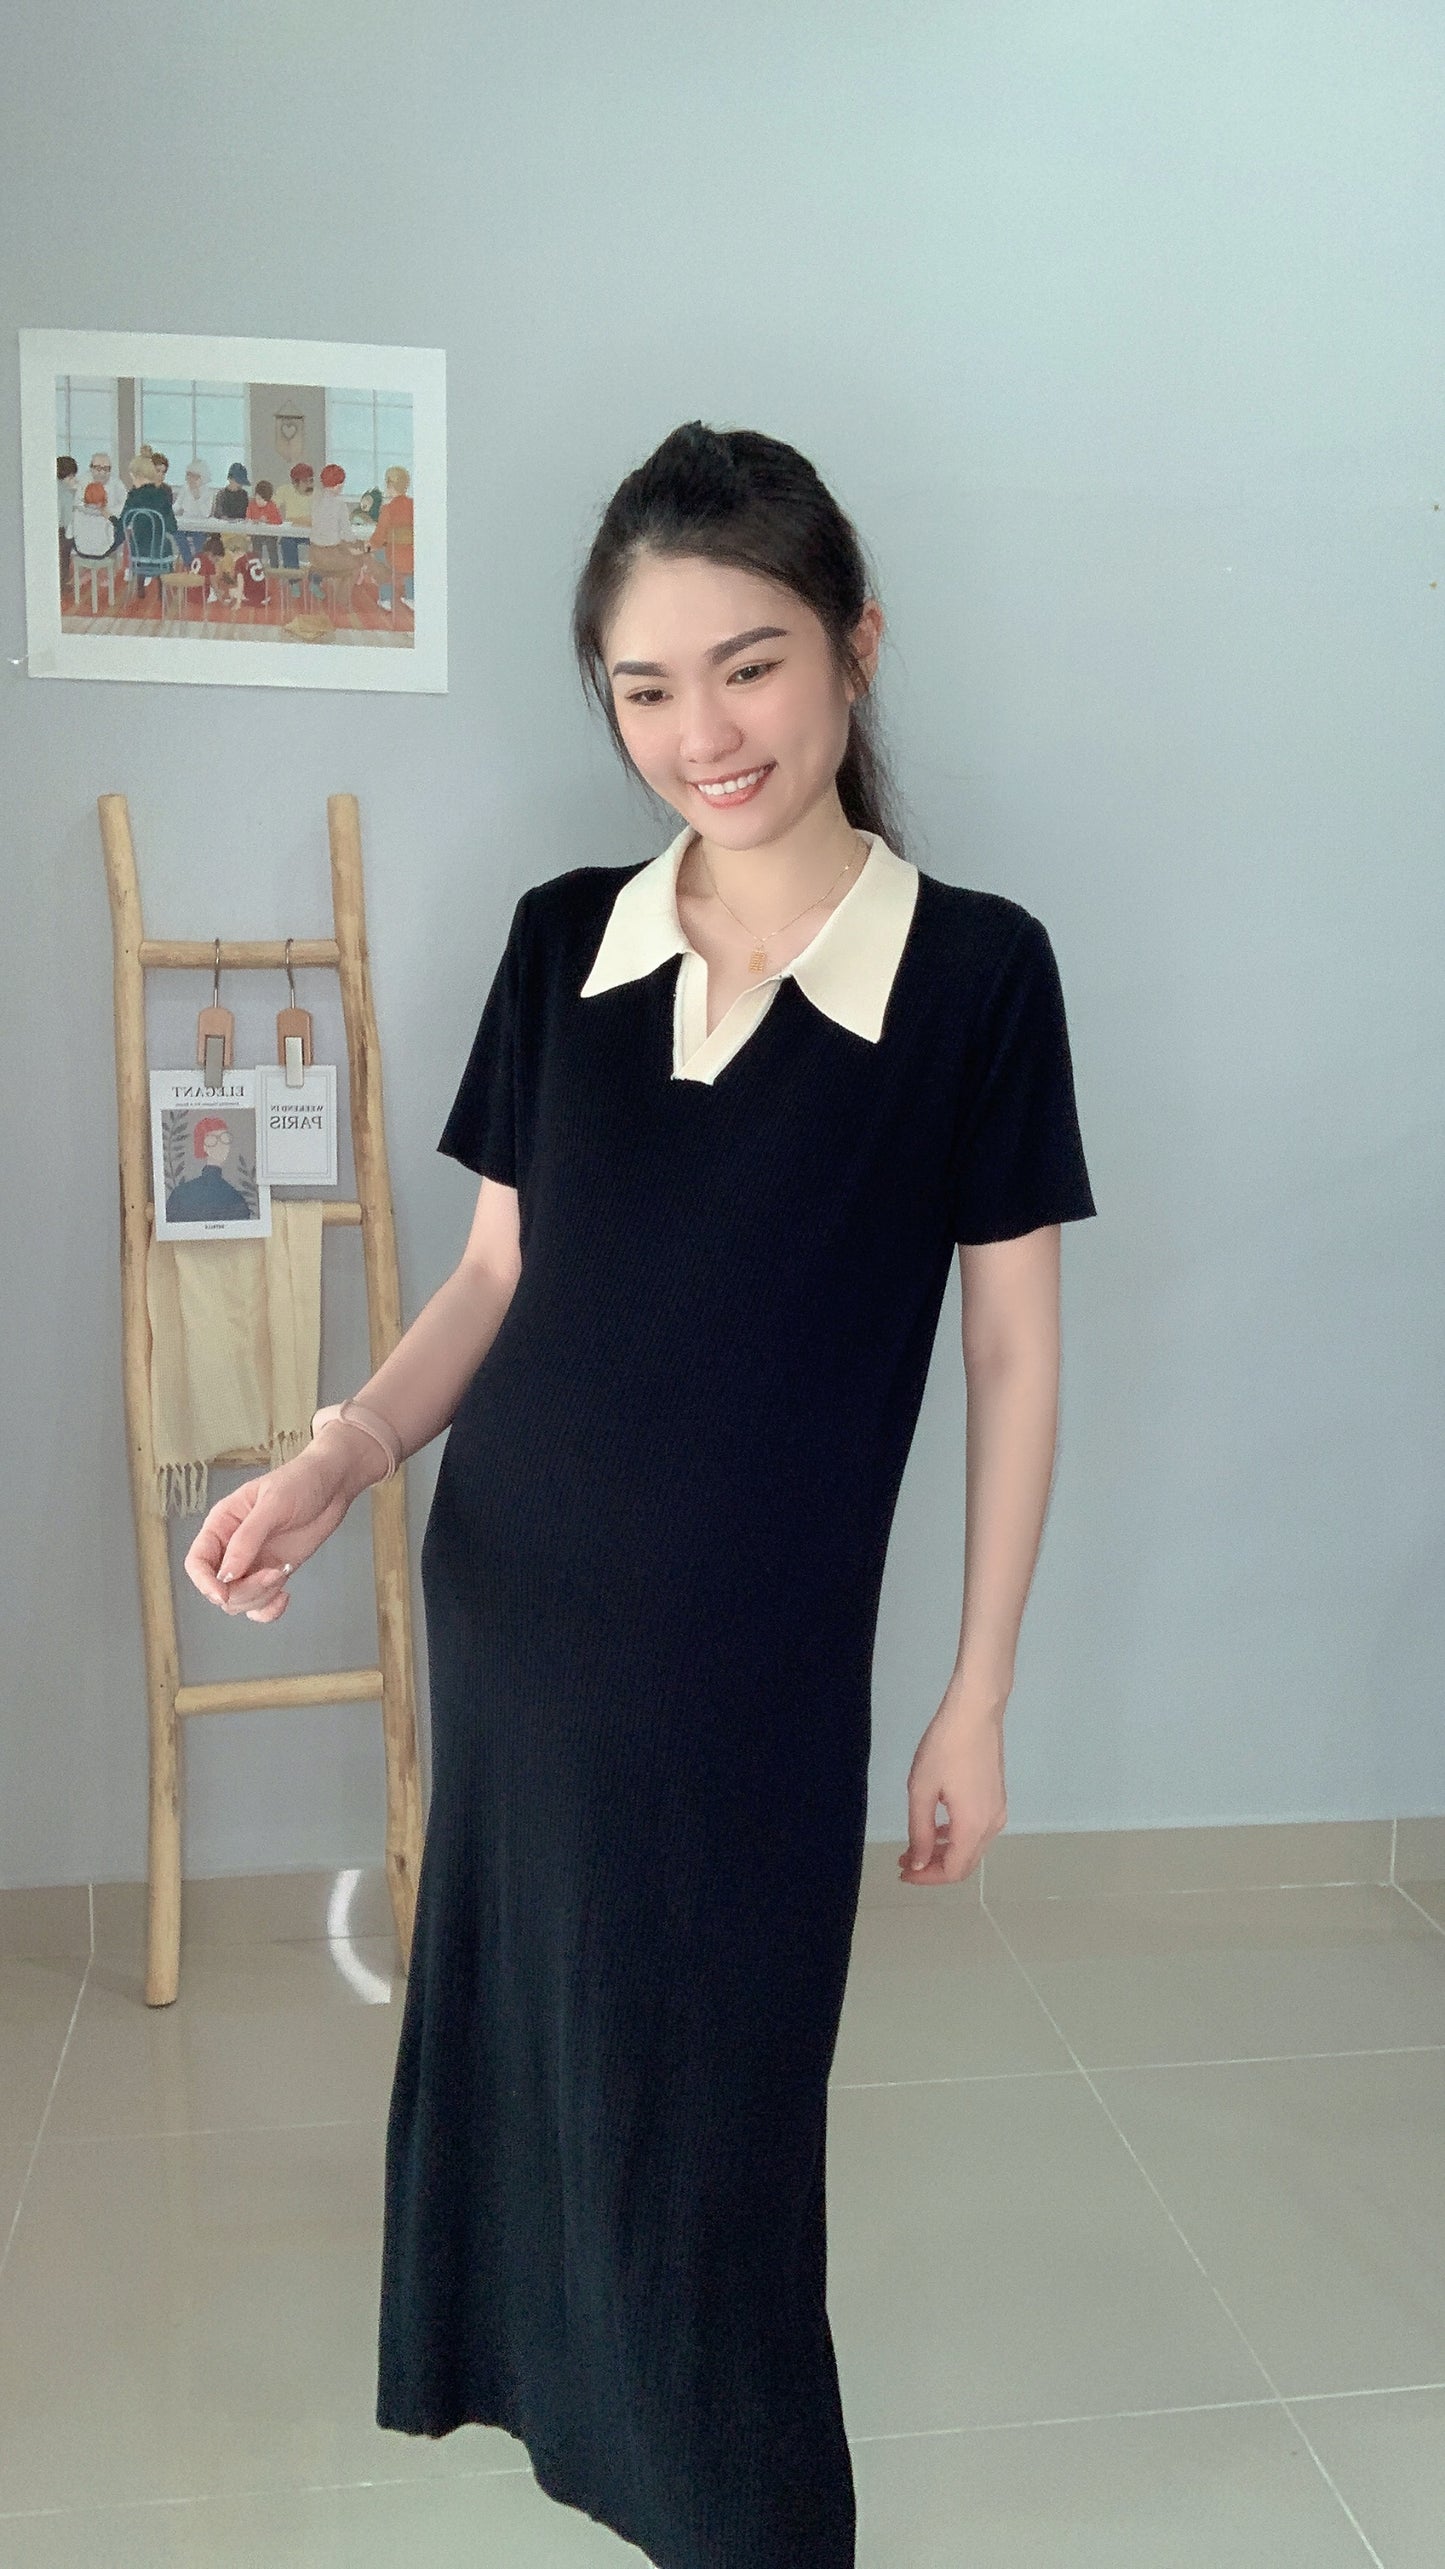 Leon Collared Stretchy Knits Dress